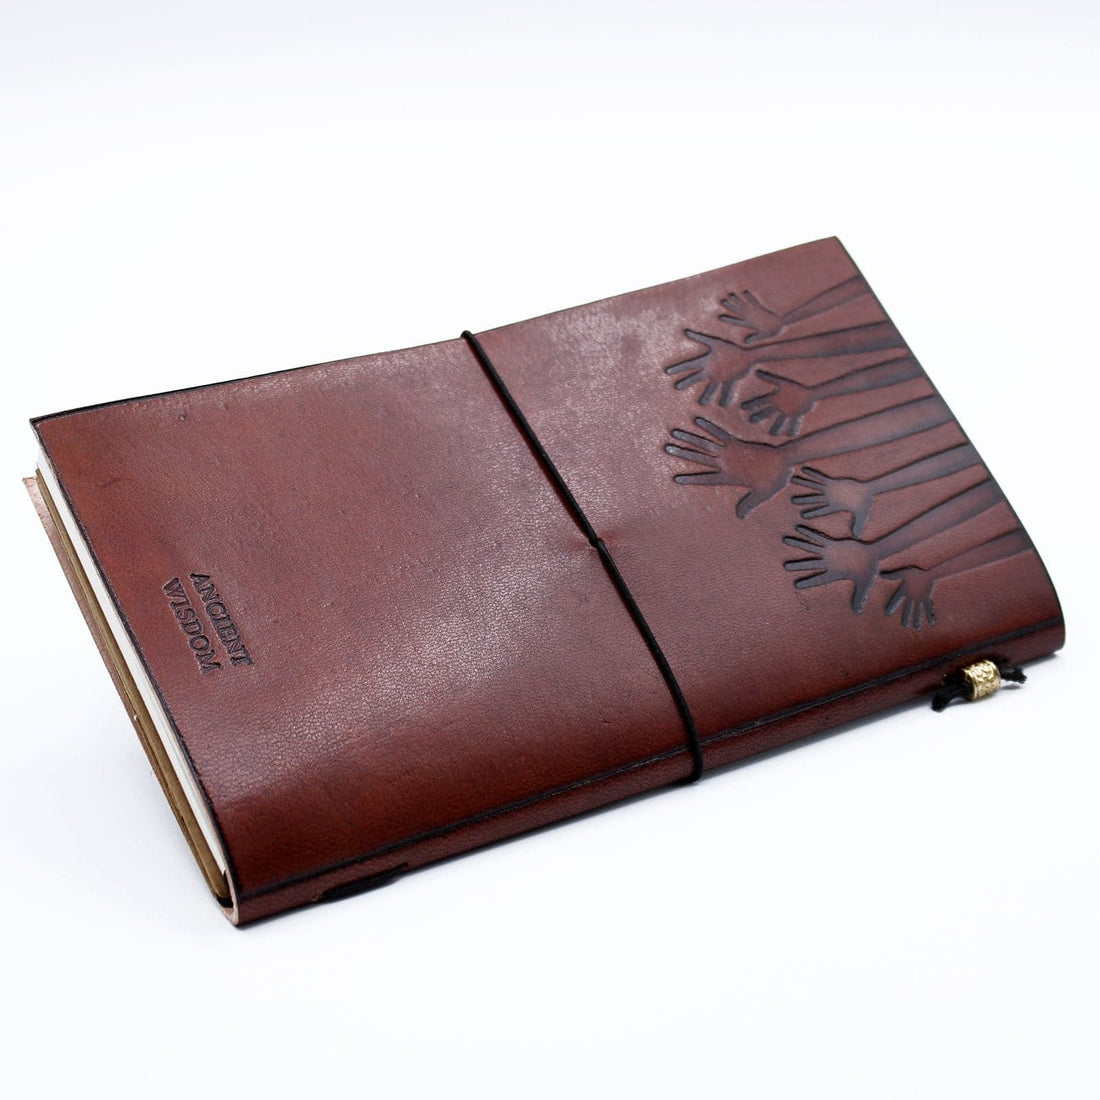 Handmade Leather Journal - True Friends - Brown (80 pages) - best price from Maltashopper.com MSJ-05